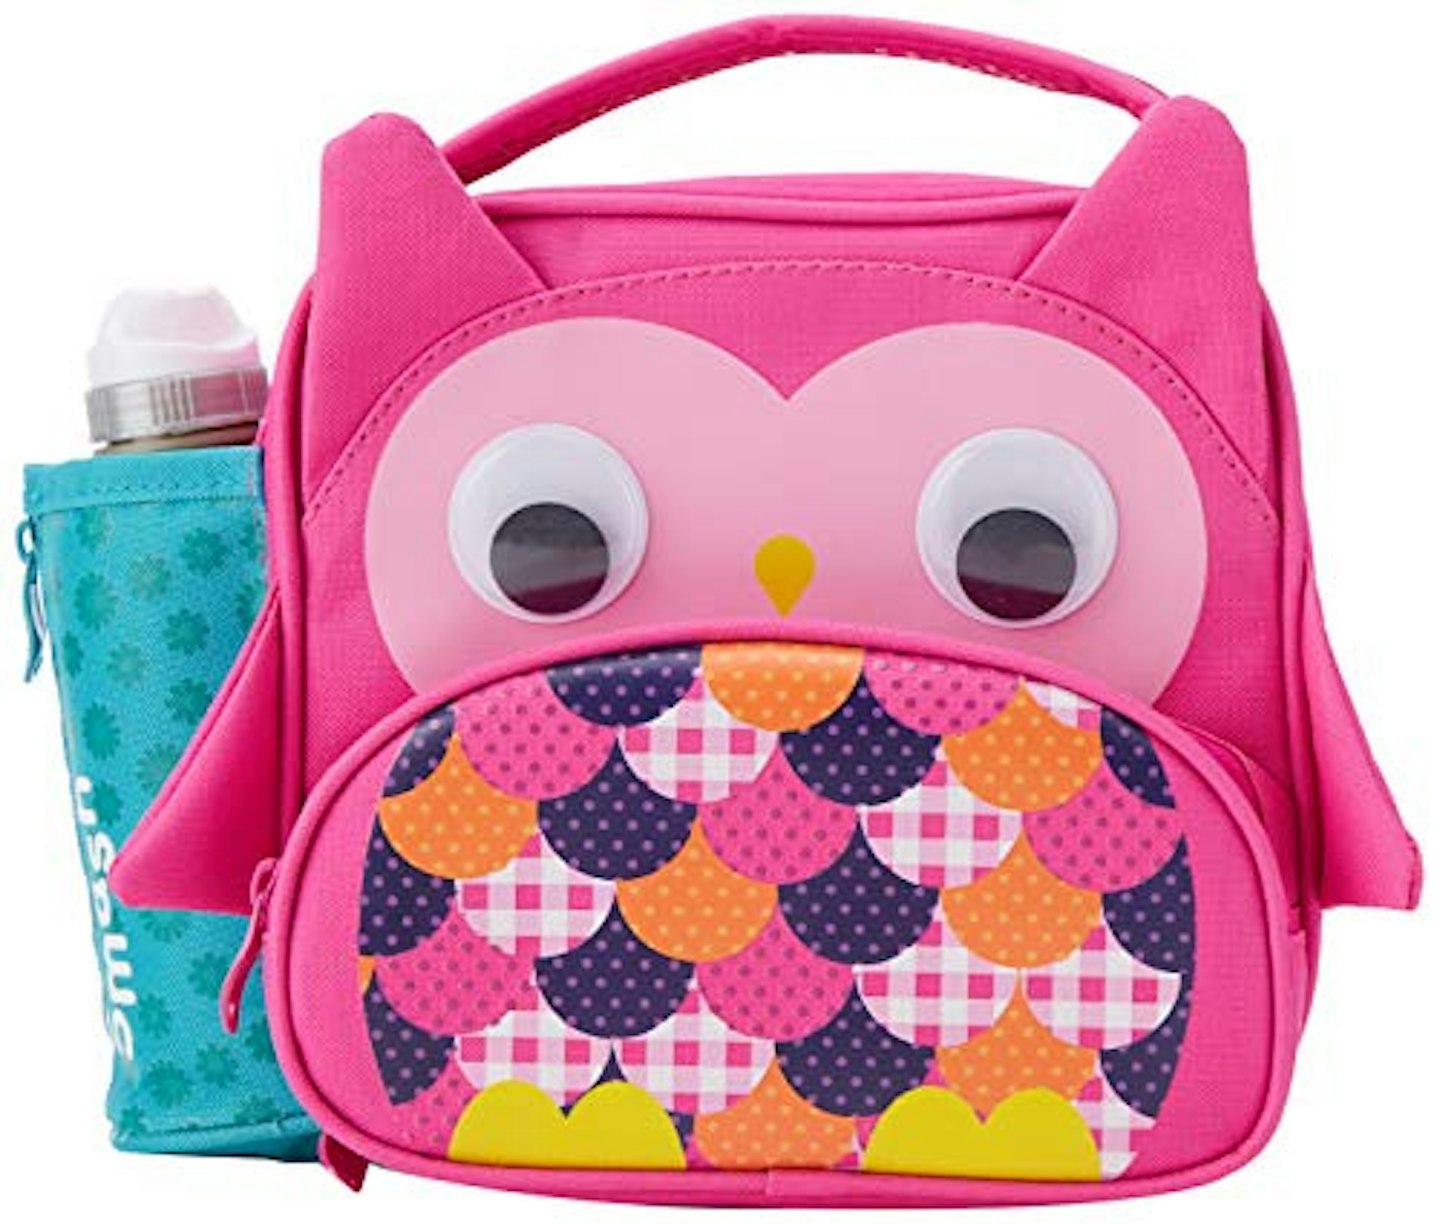 Smash Owl Insulated Lunch Bag and 350ml Bottle 